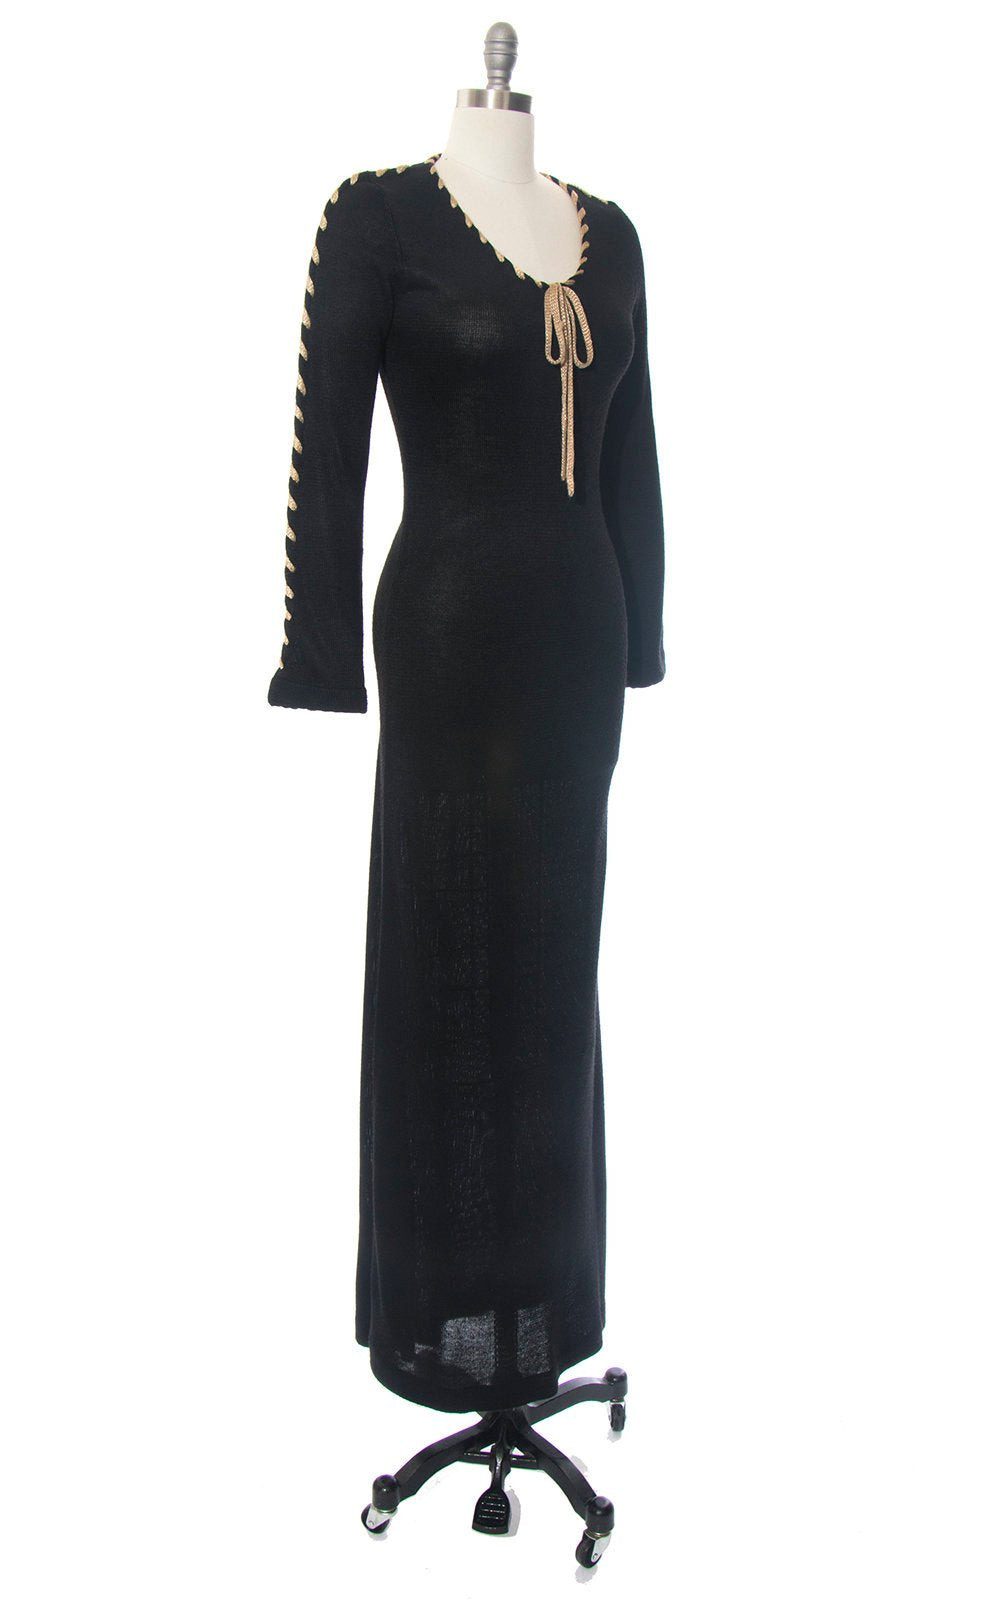 Vintage 1970s Sweater Dress | 70s Black Knit Rayon Acrylic Laced Up Long Sleeve Witchy Maxi Dress (small/medium)